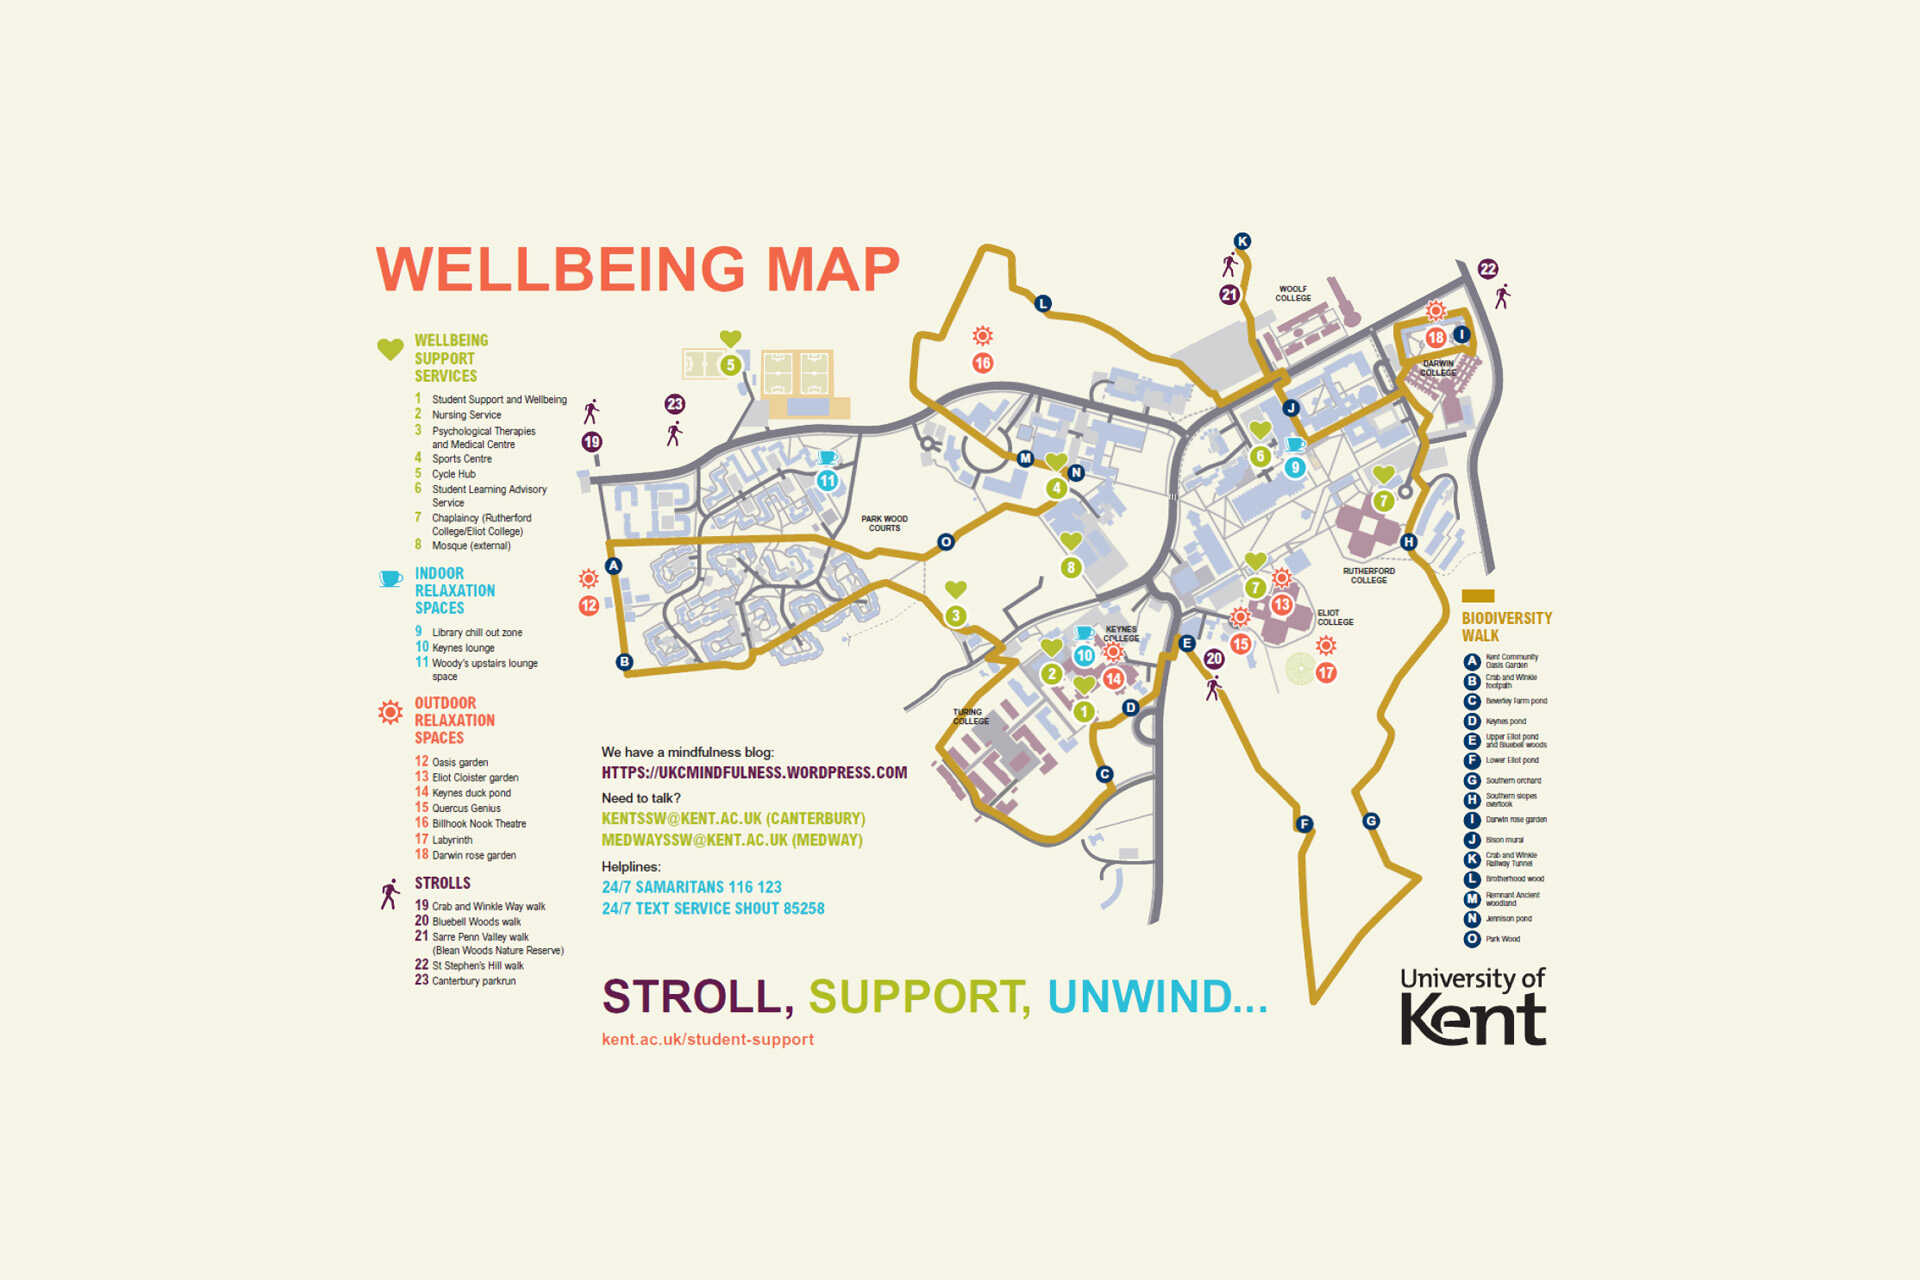 The Univeristy of Kent Wellbeing map - text alternative is below.